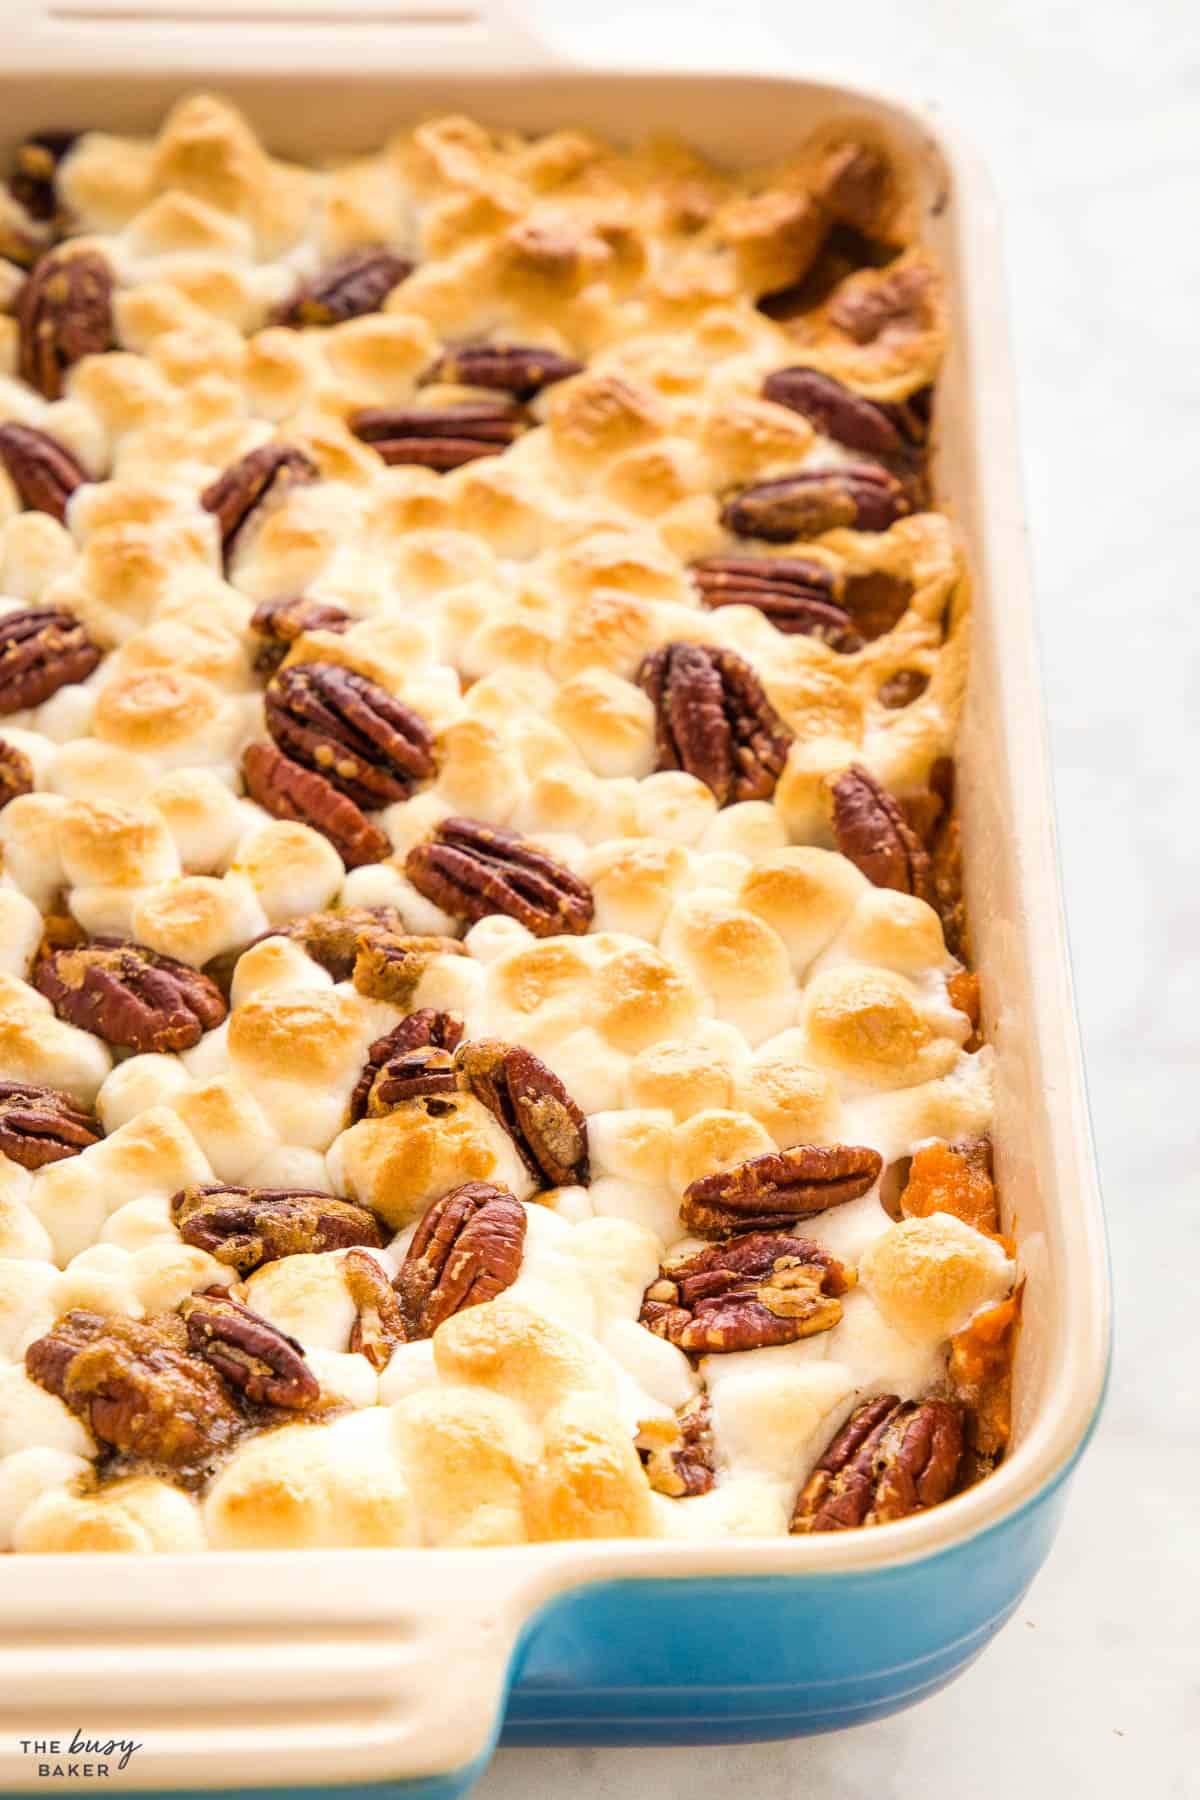 holiday side dish with yams, marshmallows and pecans